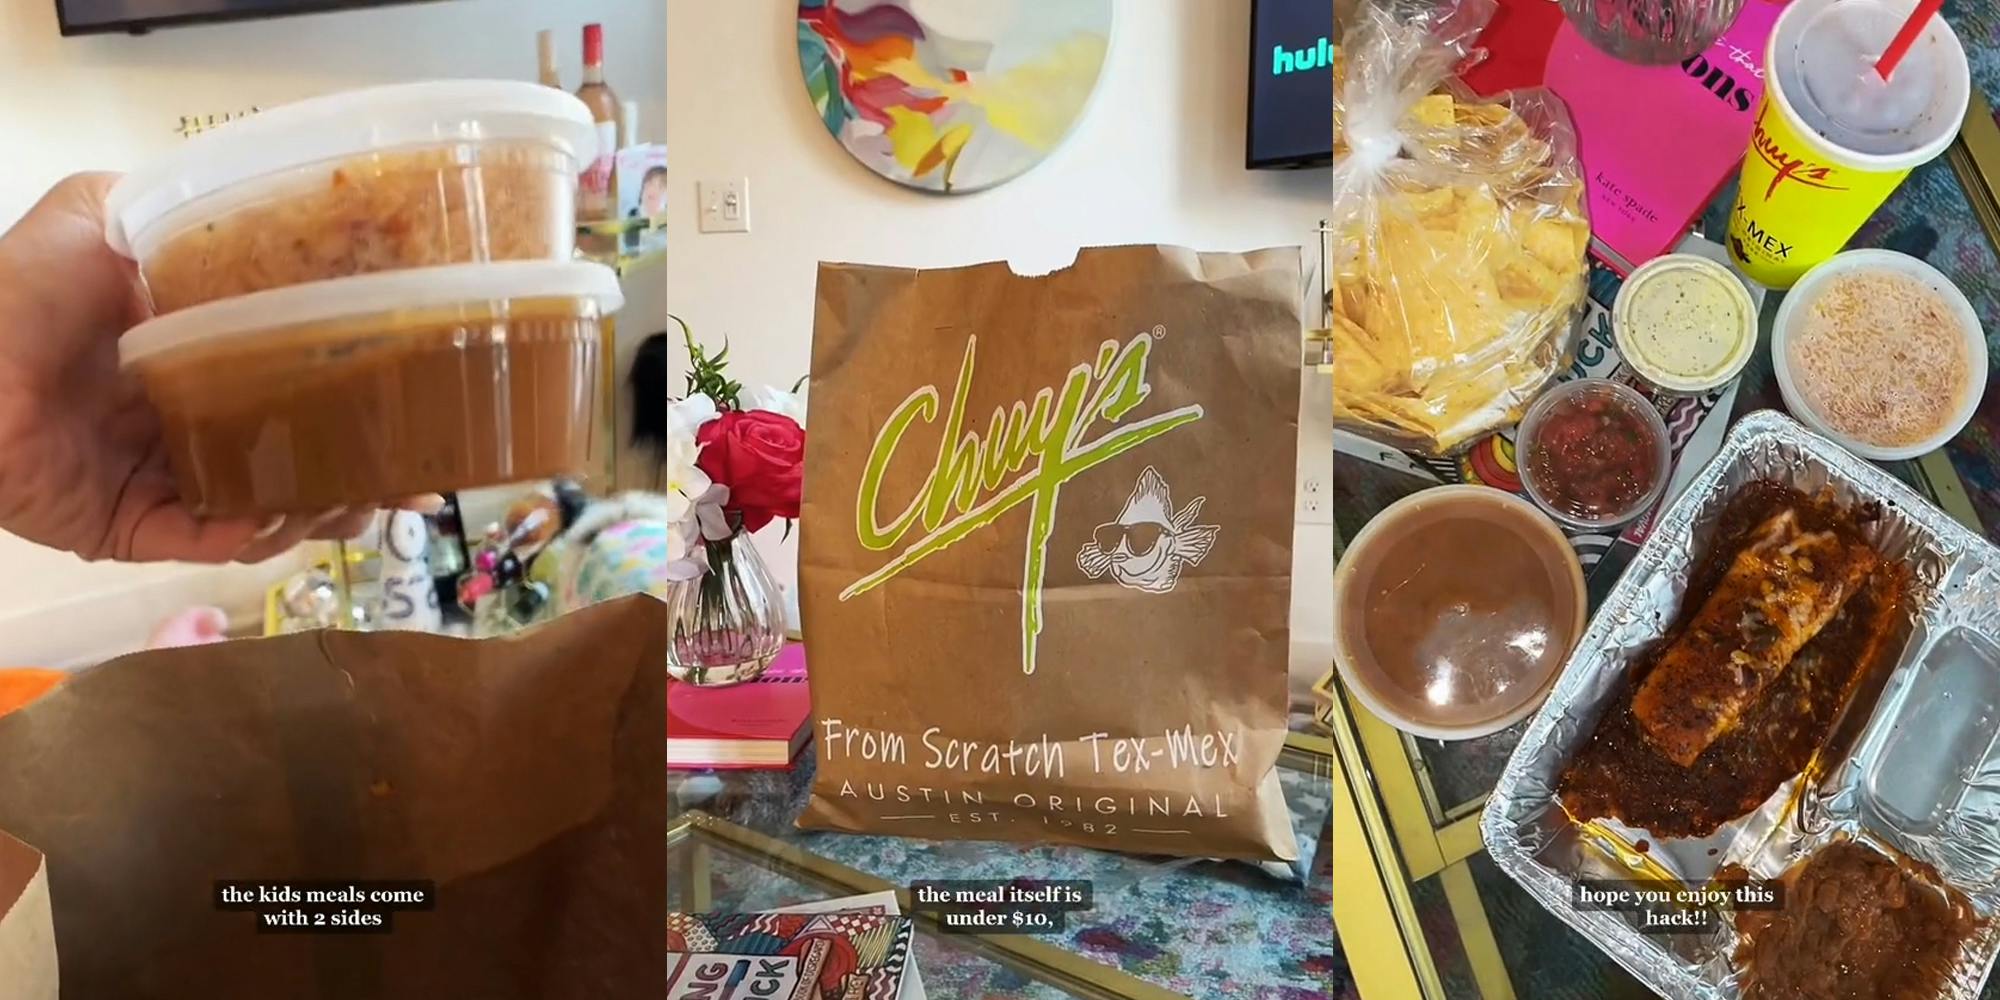 Chuy's customer holding up 2 side dishes in containers with caption "the kids meals come with 2 sides" Chuy's bag of food on table with caption "the meal itself is under $10" (c) Chuy's food on table with caption "hope you enjoy this hack!" (r)